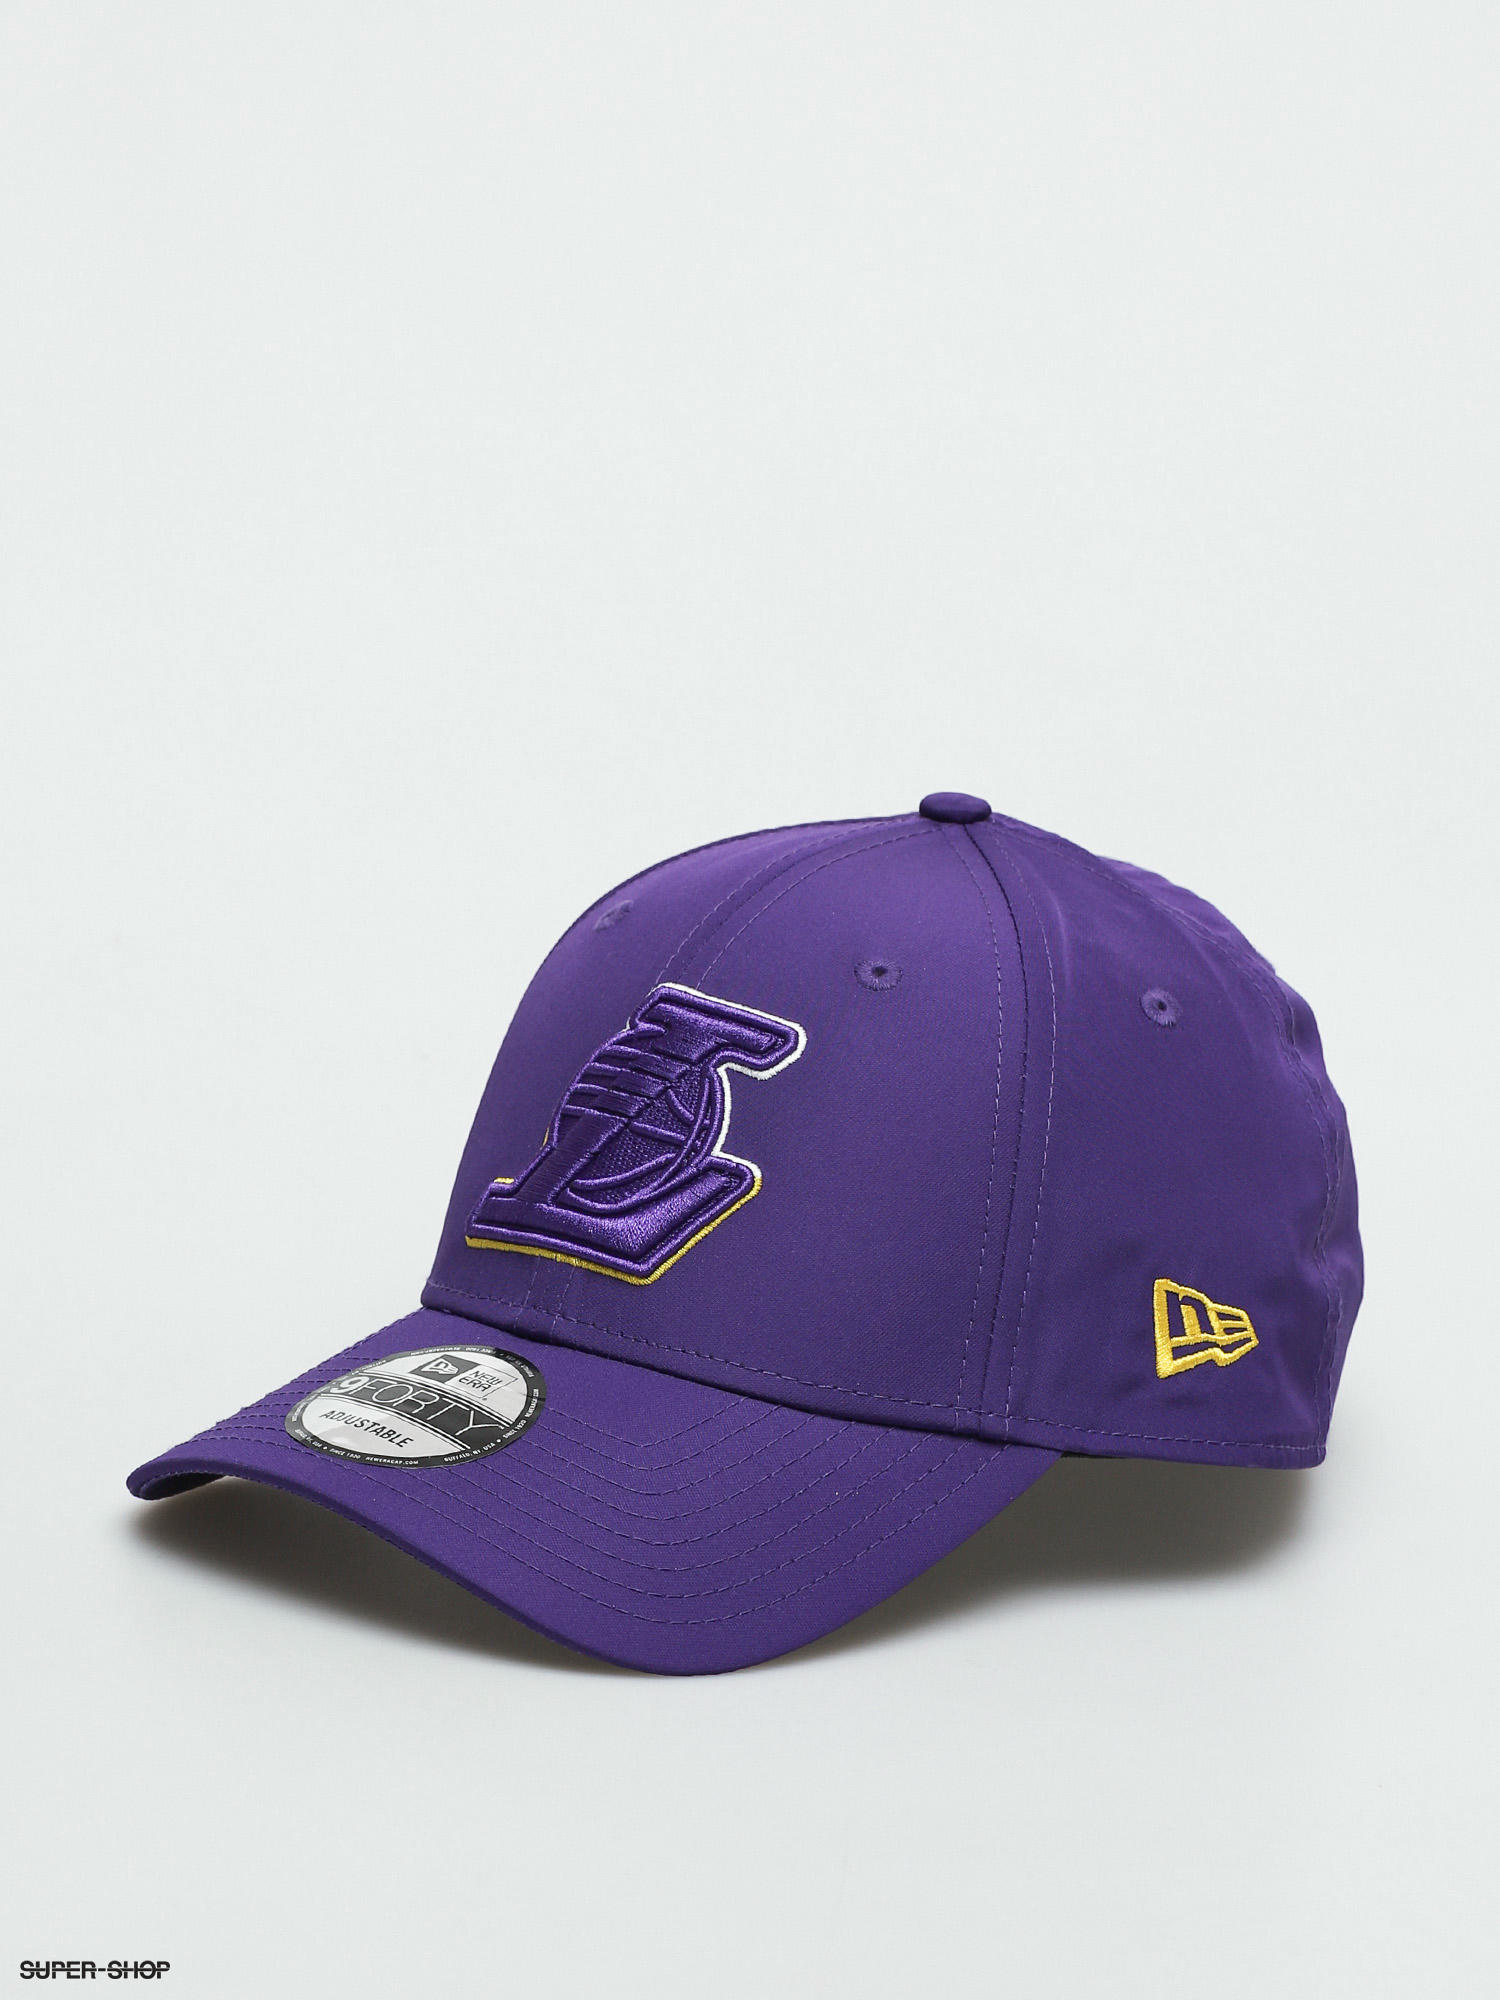 Lids Los Angeles Lakers New Era Active 9FORTY Snapback Hat - Gray/Purple